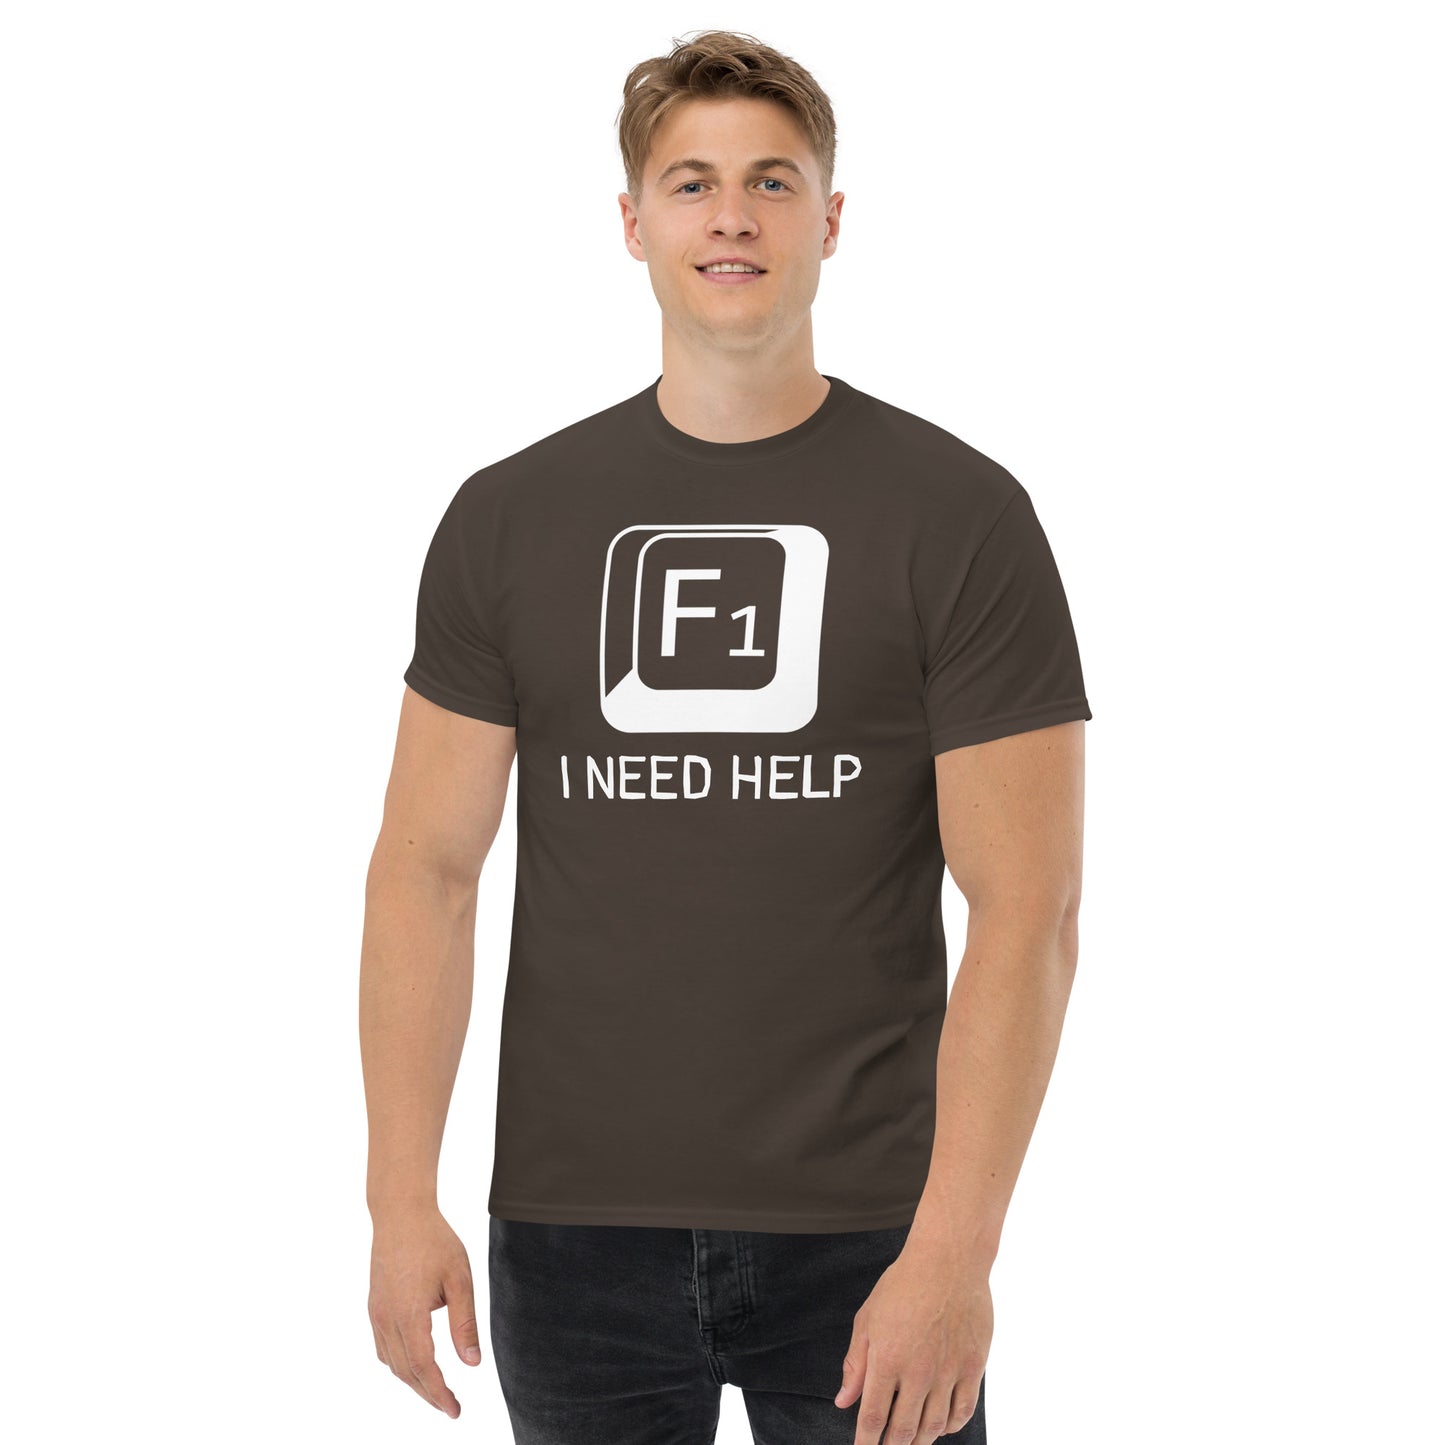 Men with dark chocolate T-shirt and a picture of F1 key with text "I need help"